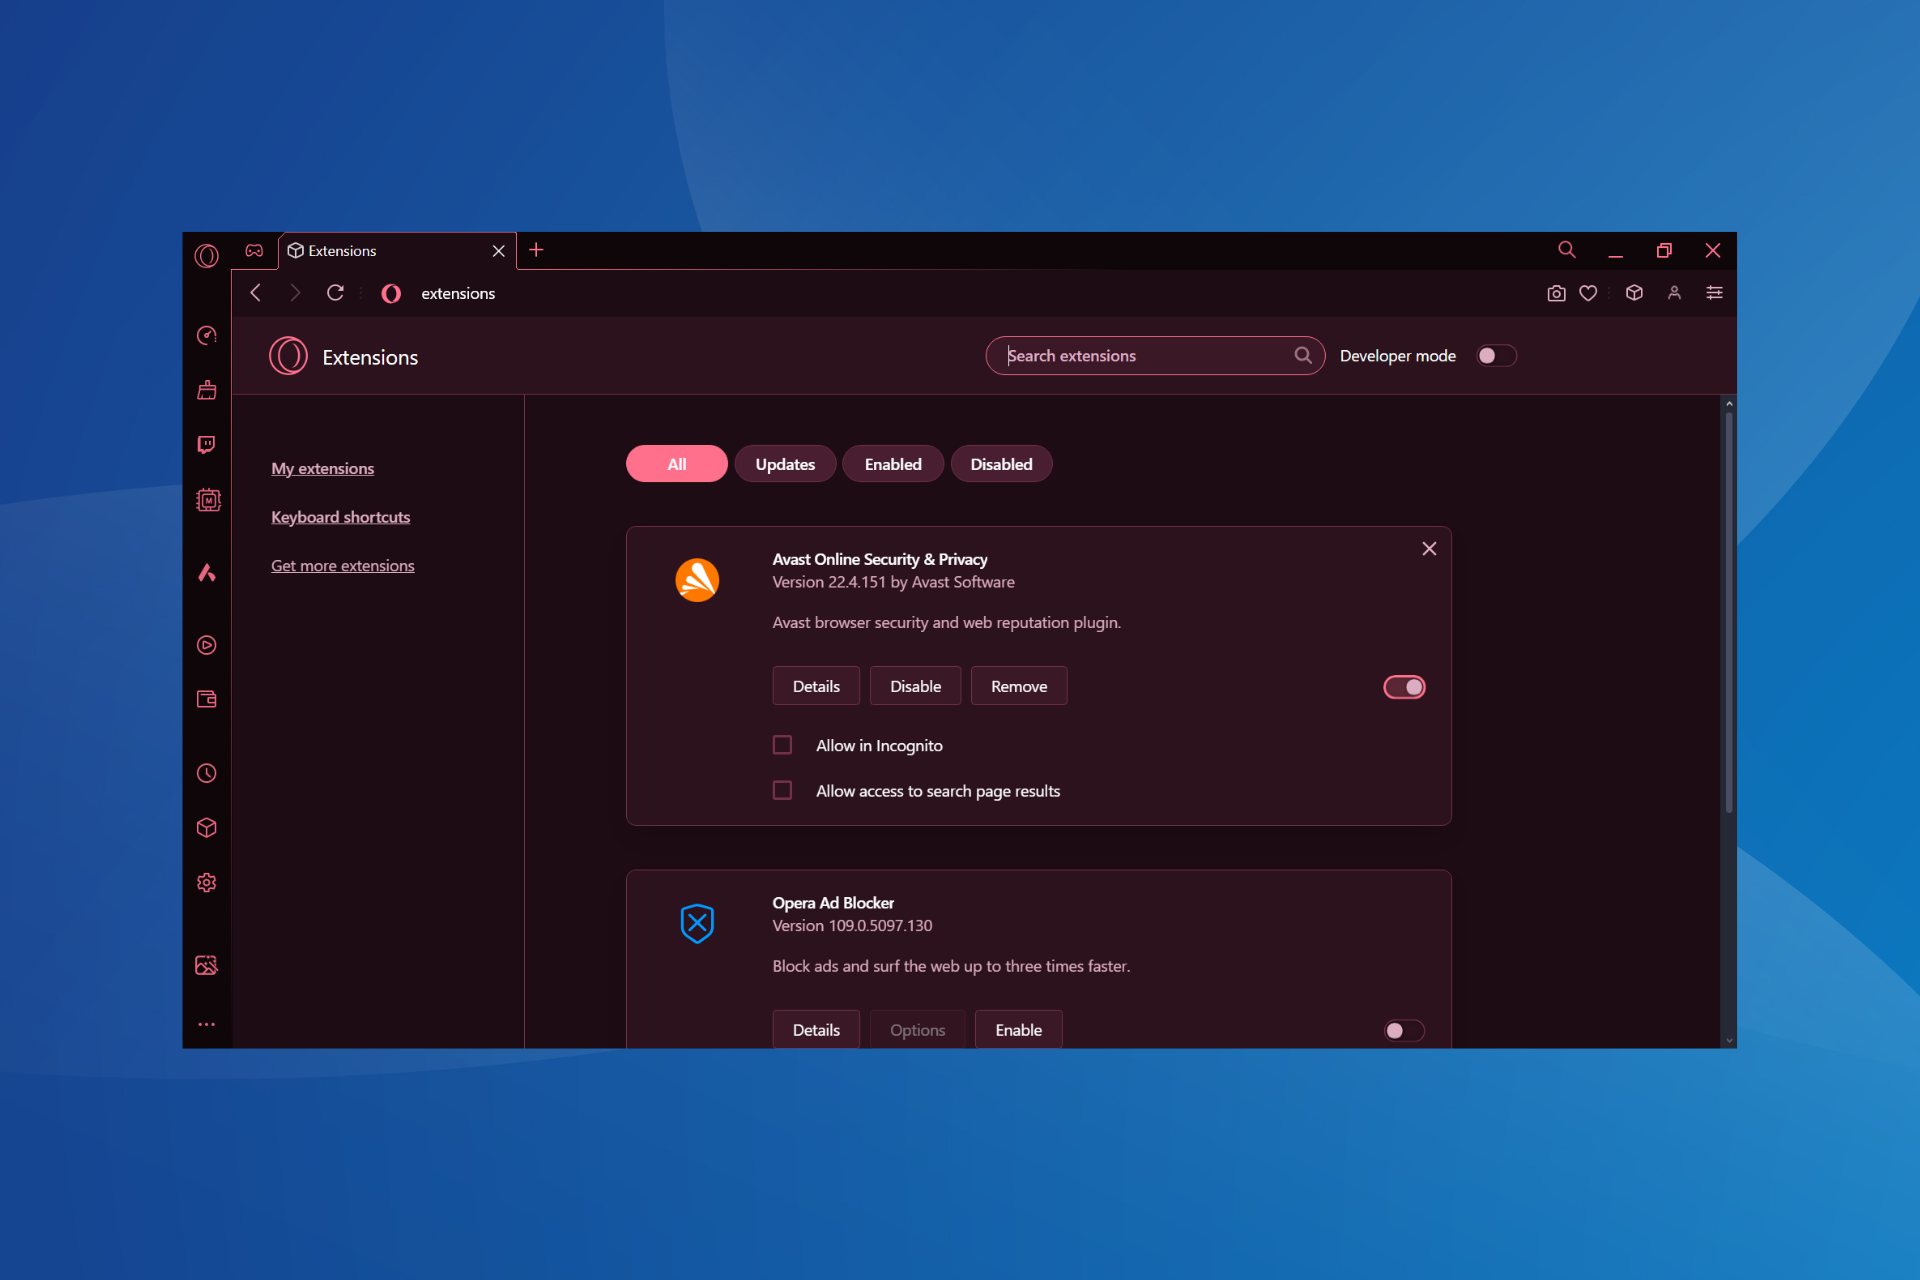 how to manage extensions on Opera GX